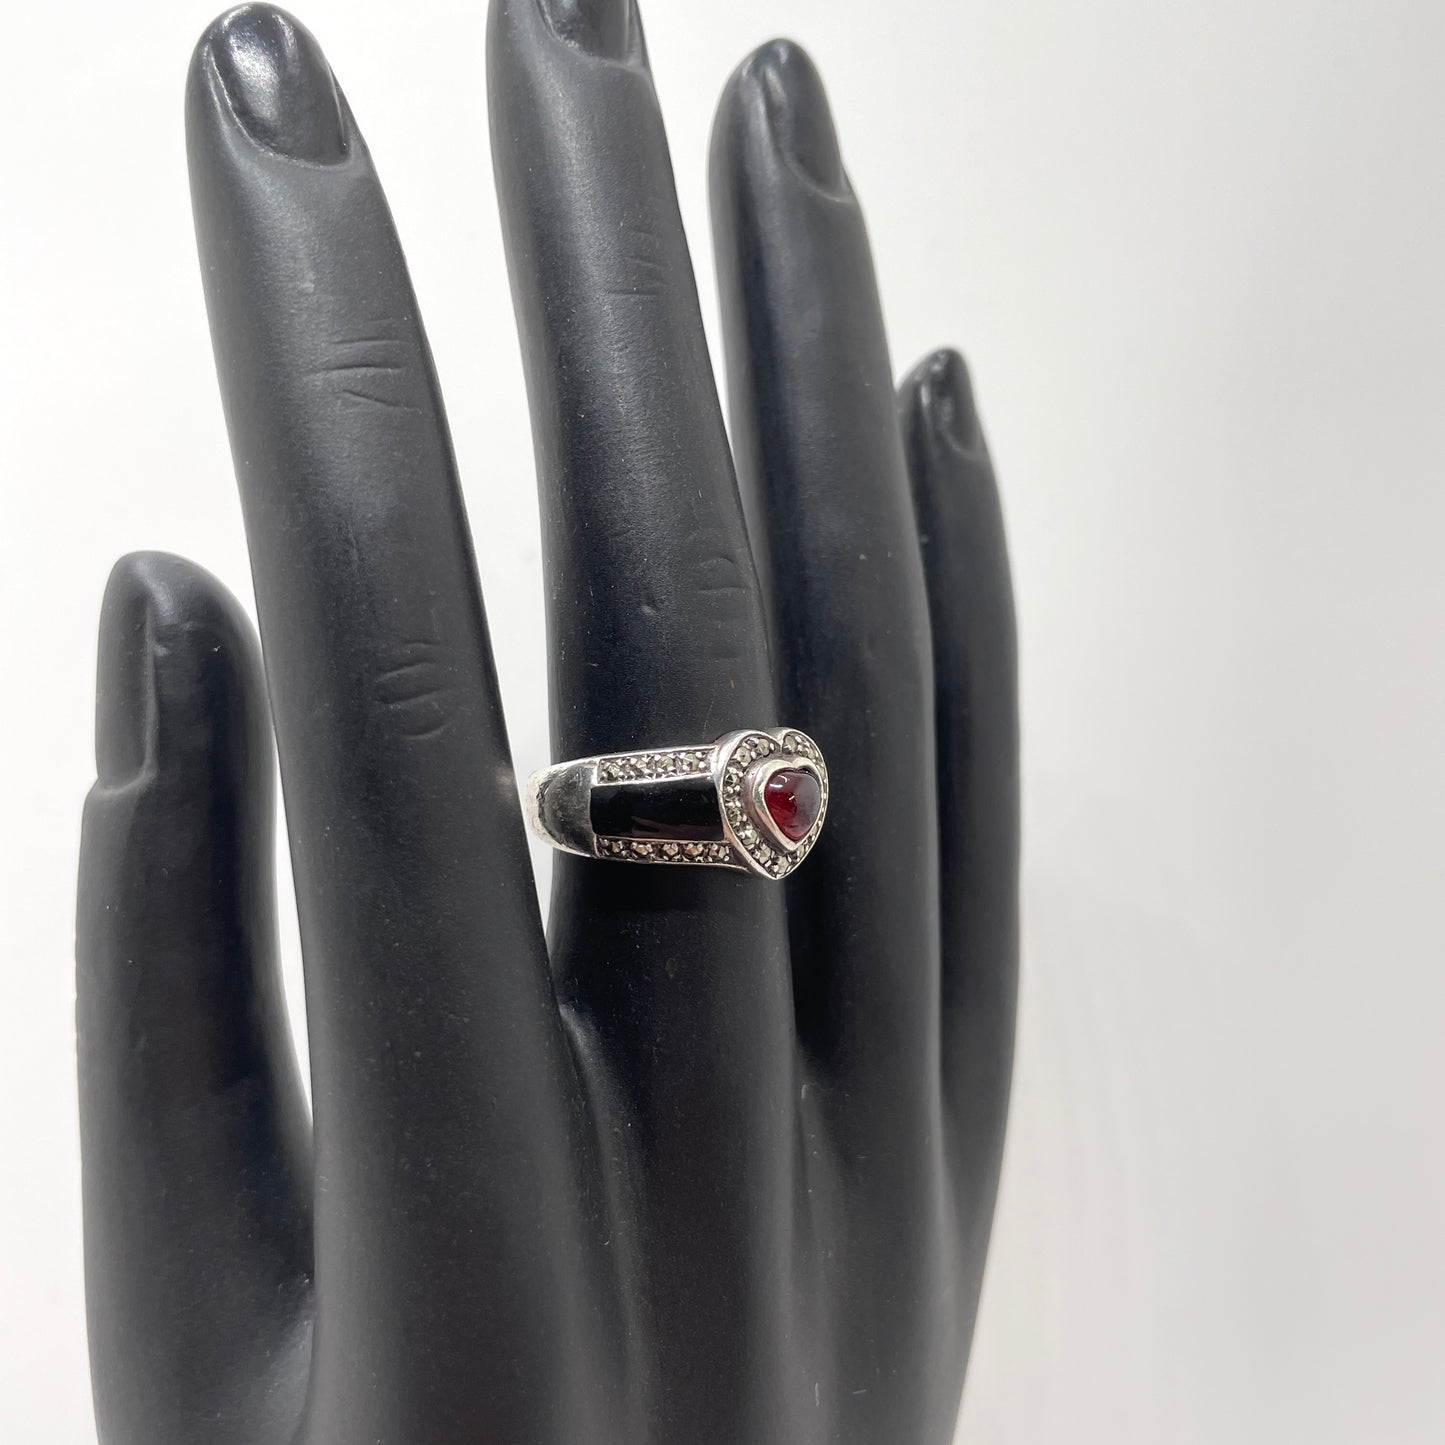 Vintage Sterling, Black Onyx & Ruby Heart Ring - Size 7.25